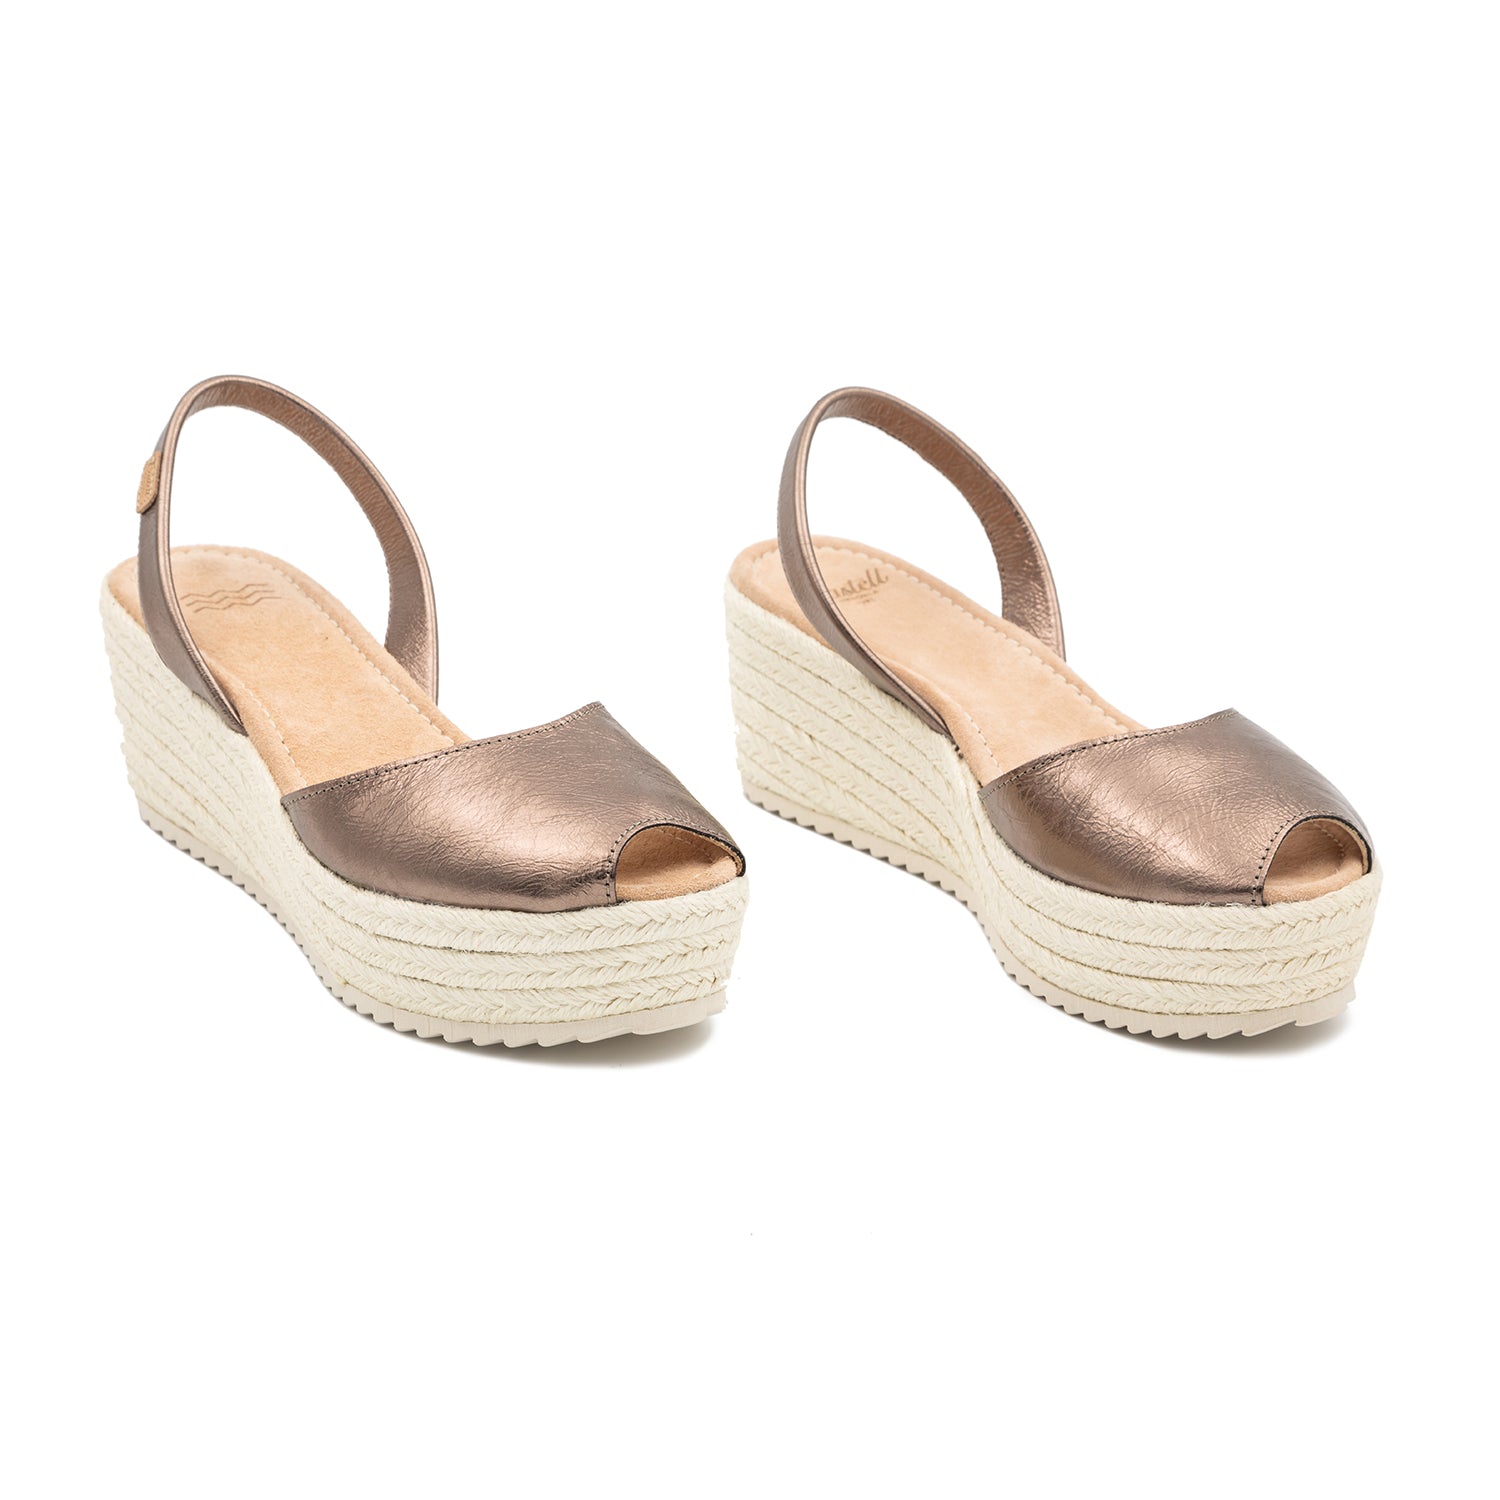 Standard Leather Menorcan Sandal With Metallic Touch For Women – 2580 Vico Las Vegas